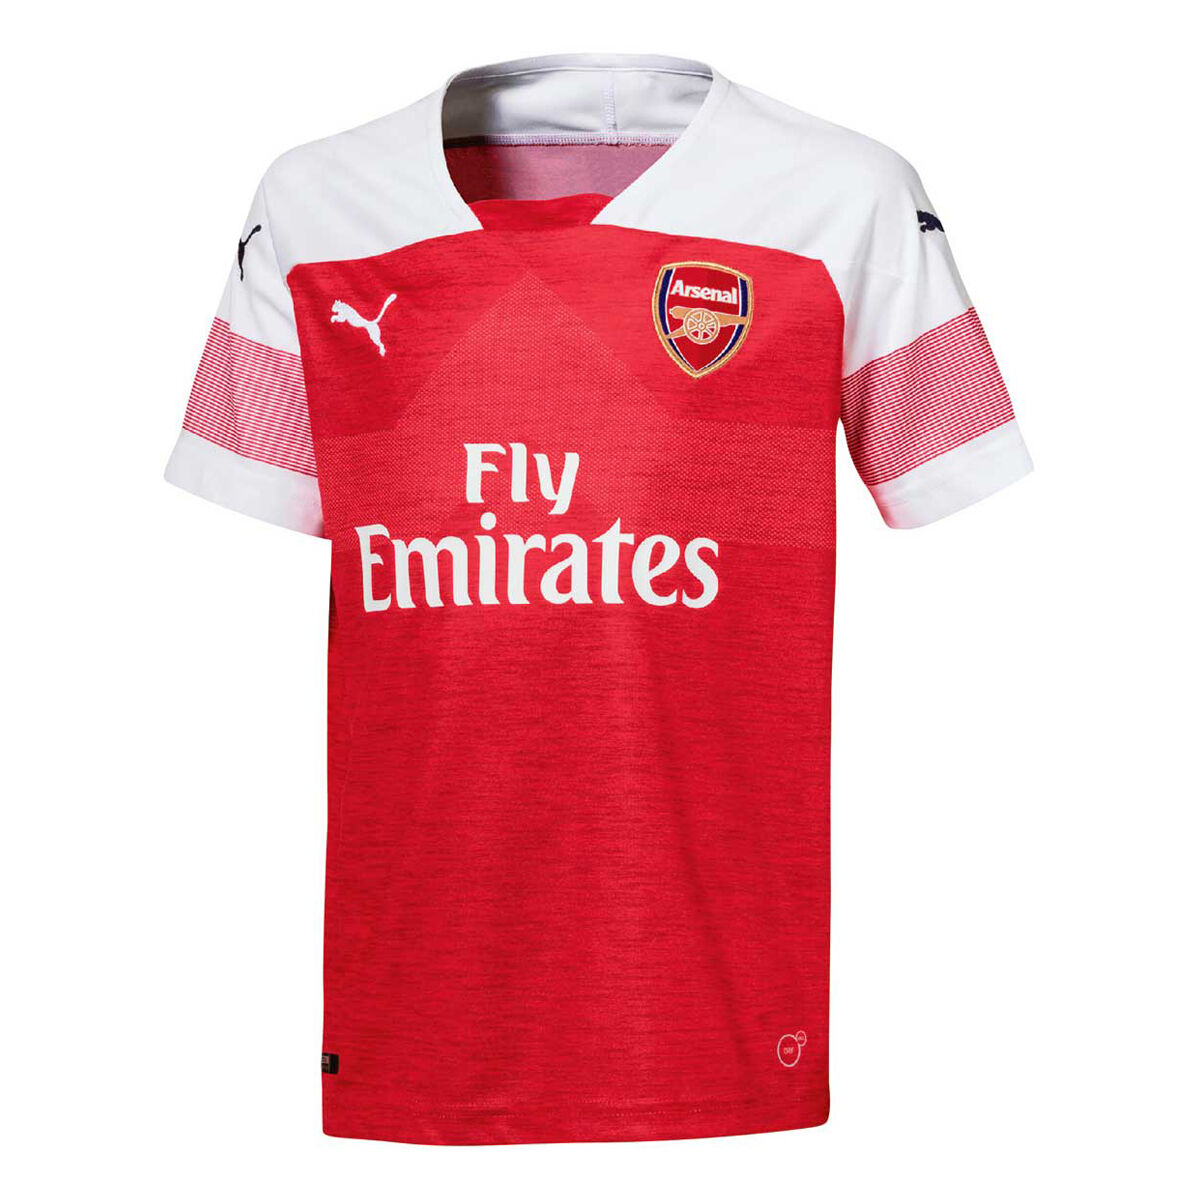 Arsenal FC 2018 / 19 Mens Home Jersey 